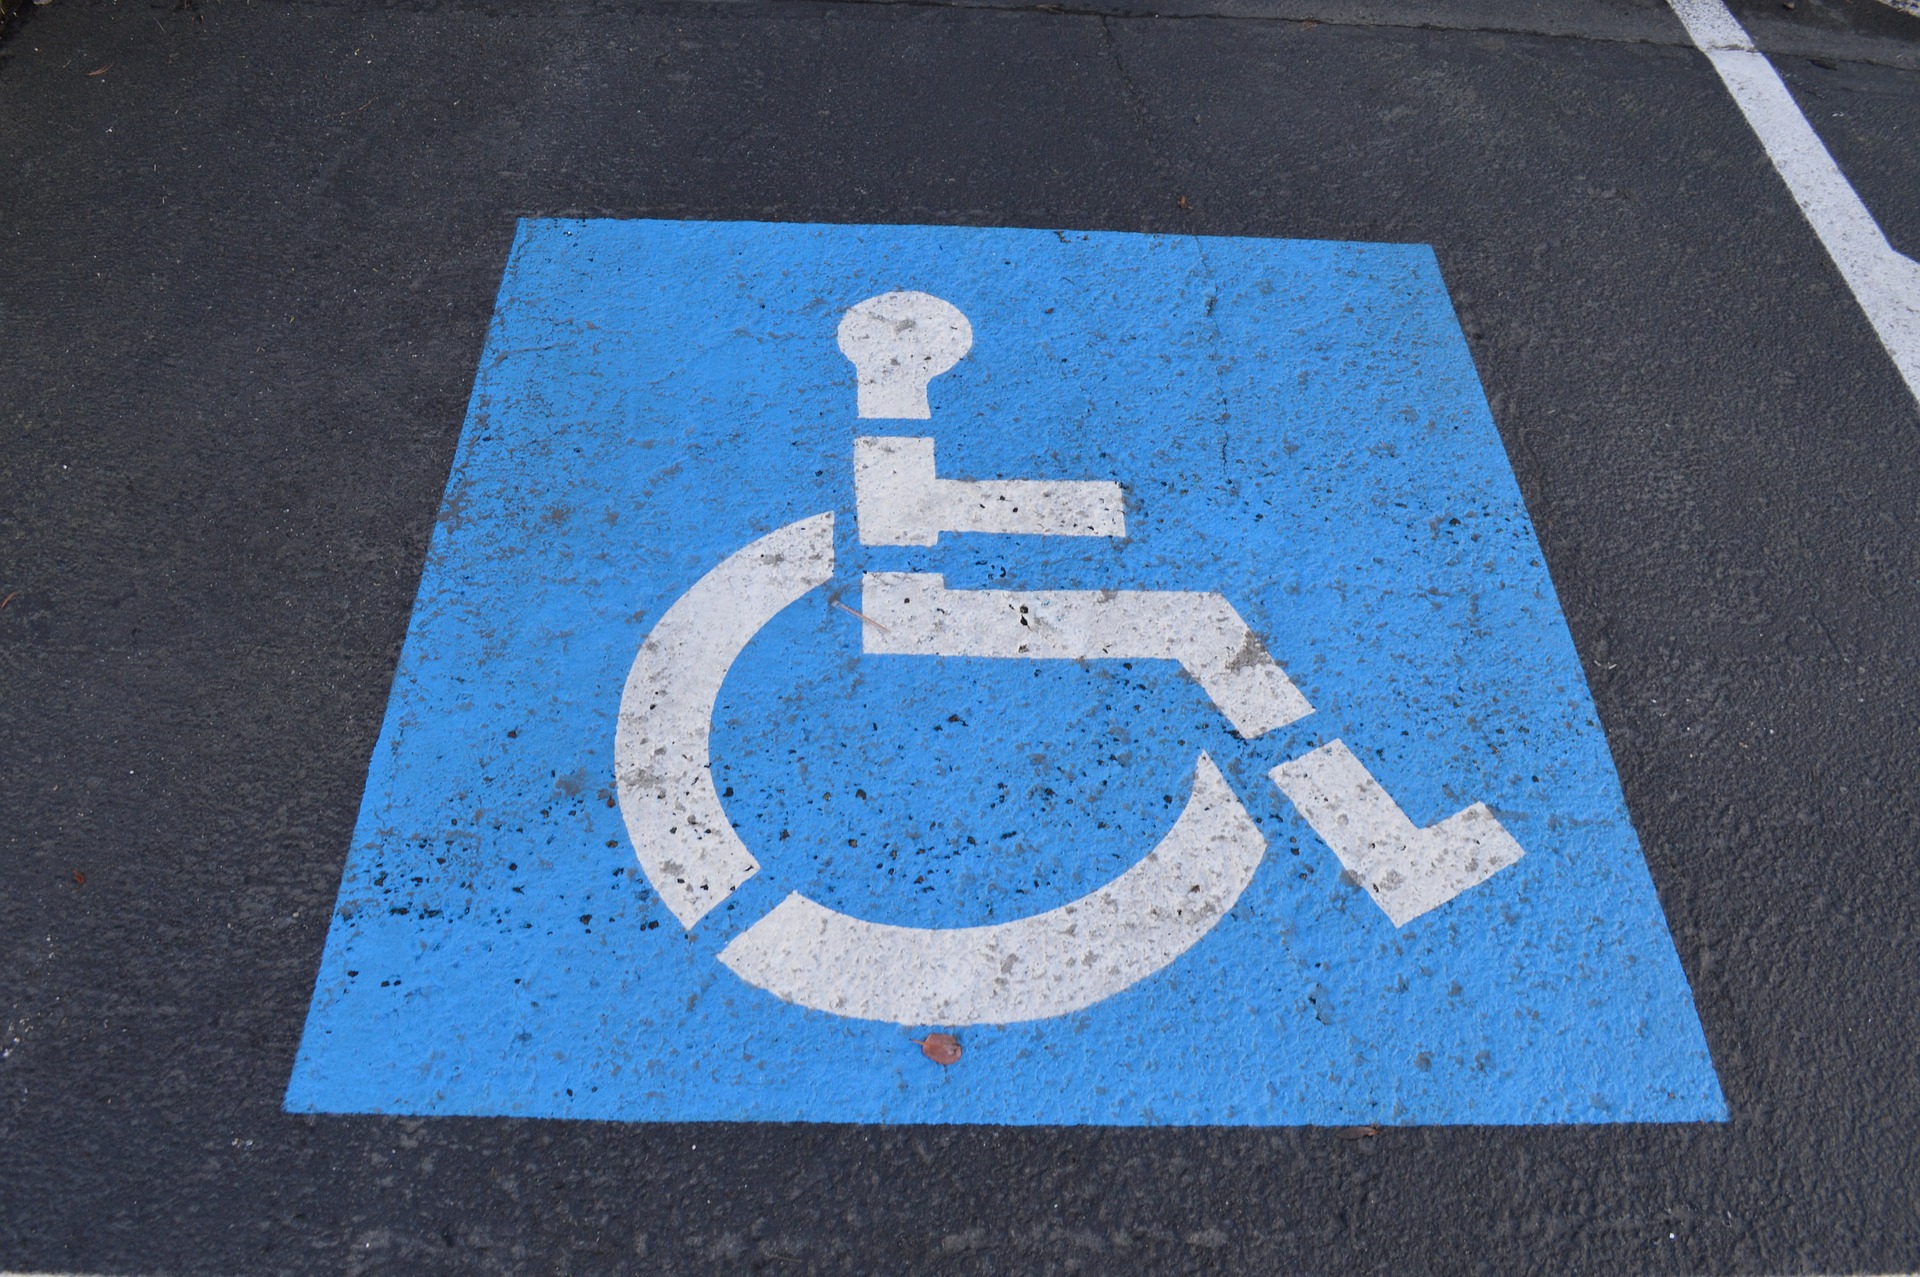 TBI and the Americans with Disabilities Act